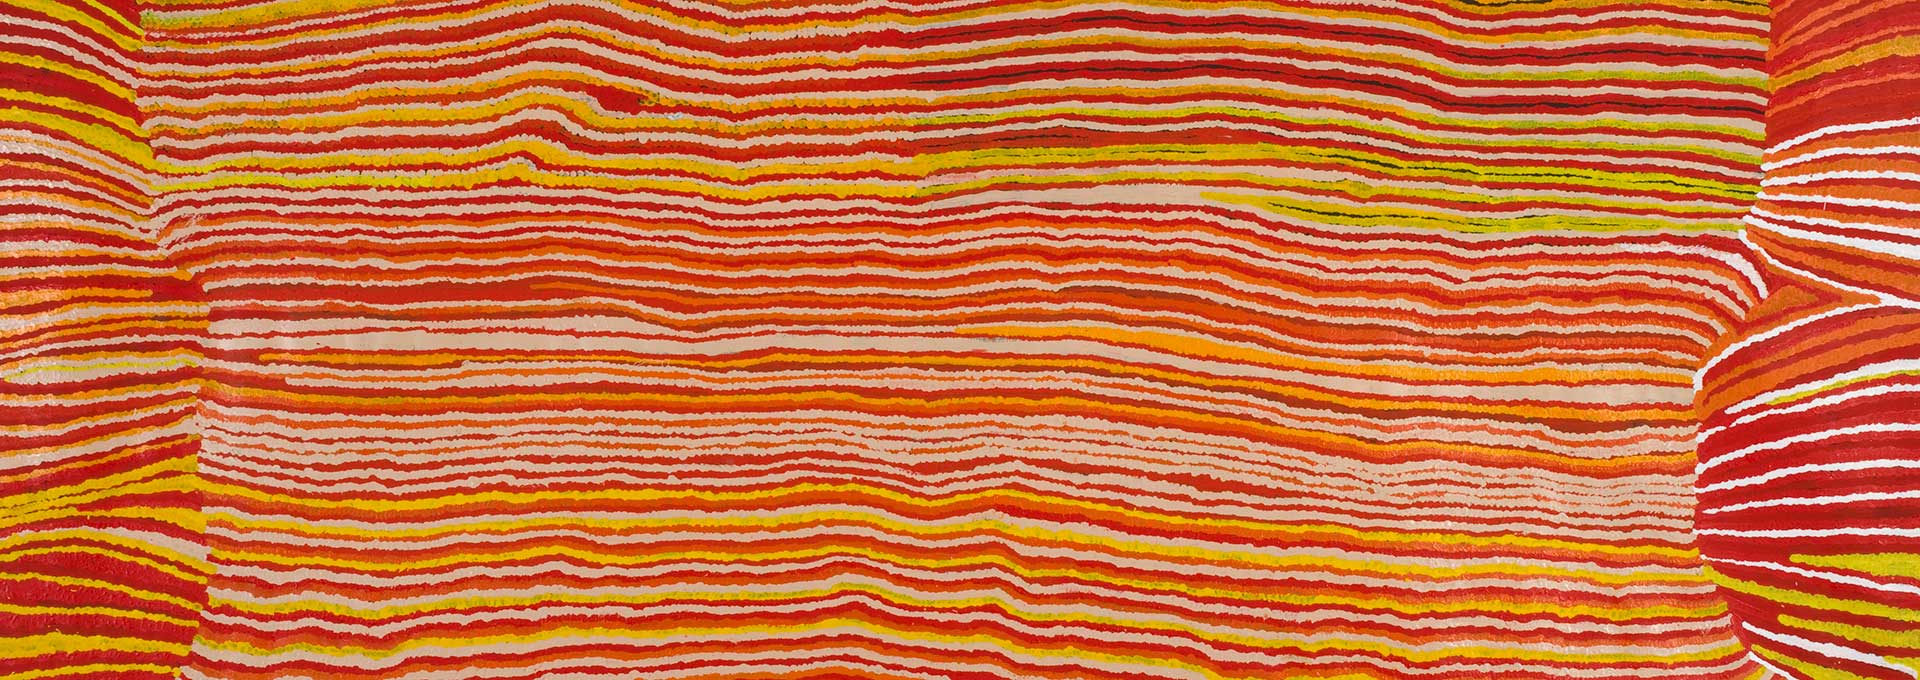 A long horizontally striped painting on canvas in red, orange, yellow white and beige wavy lines. At both ends are sections of horizontal stripes that are offset and at different angles from the central section. The right side has more white and dark red stripes while the left side has more yellow stripes.